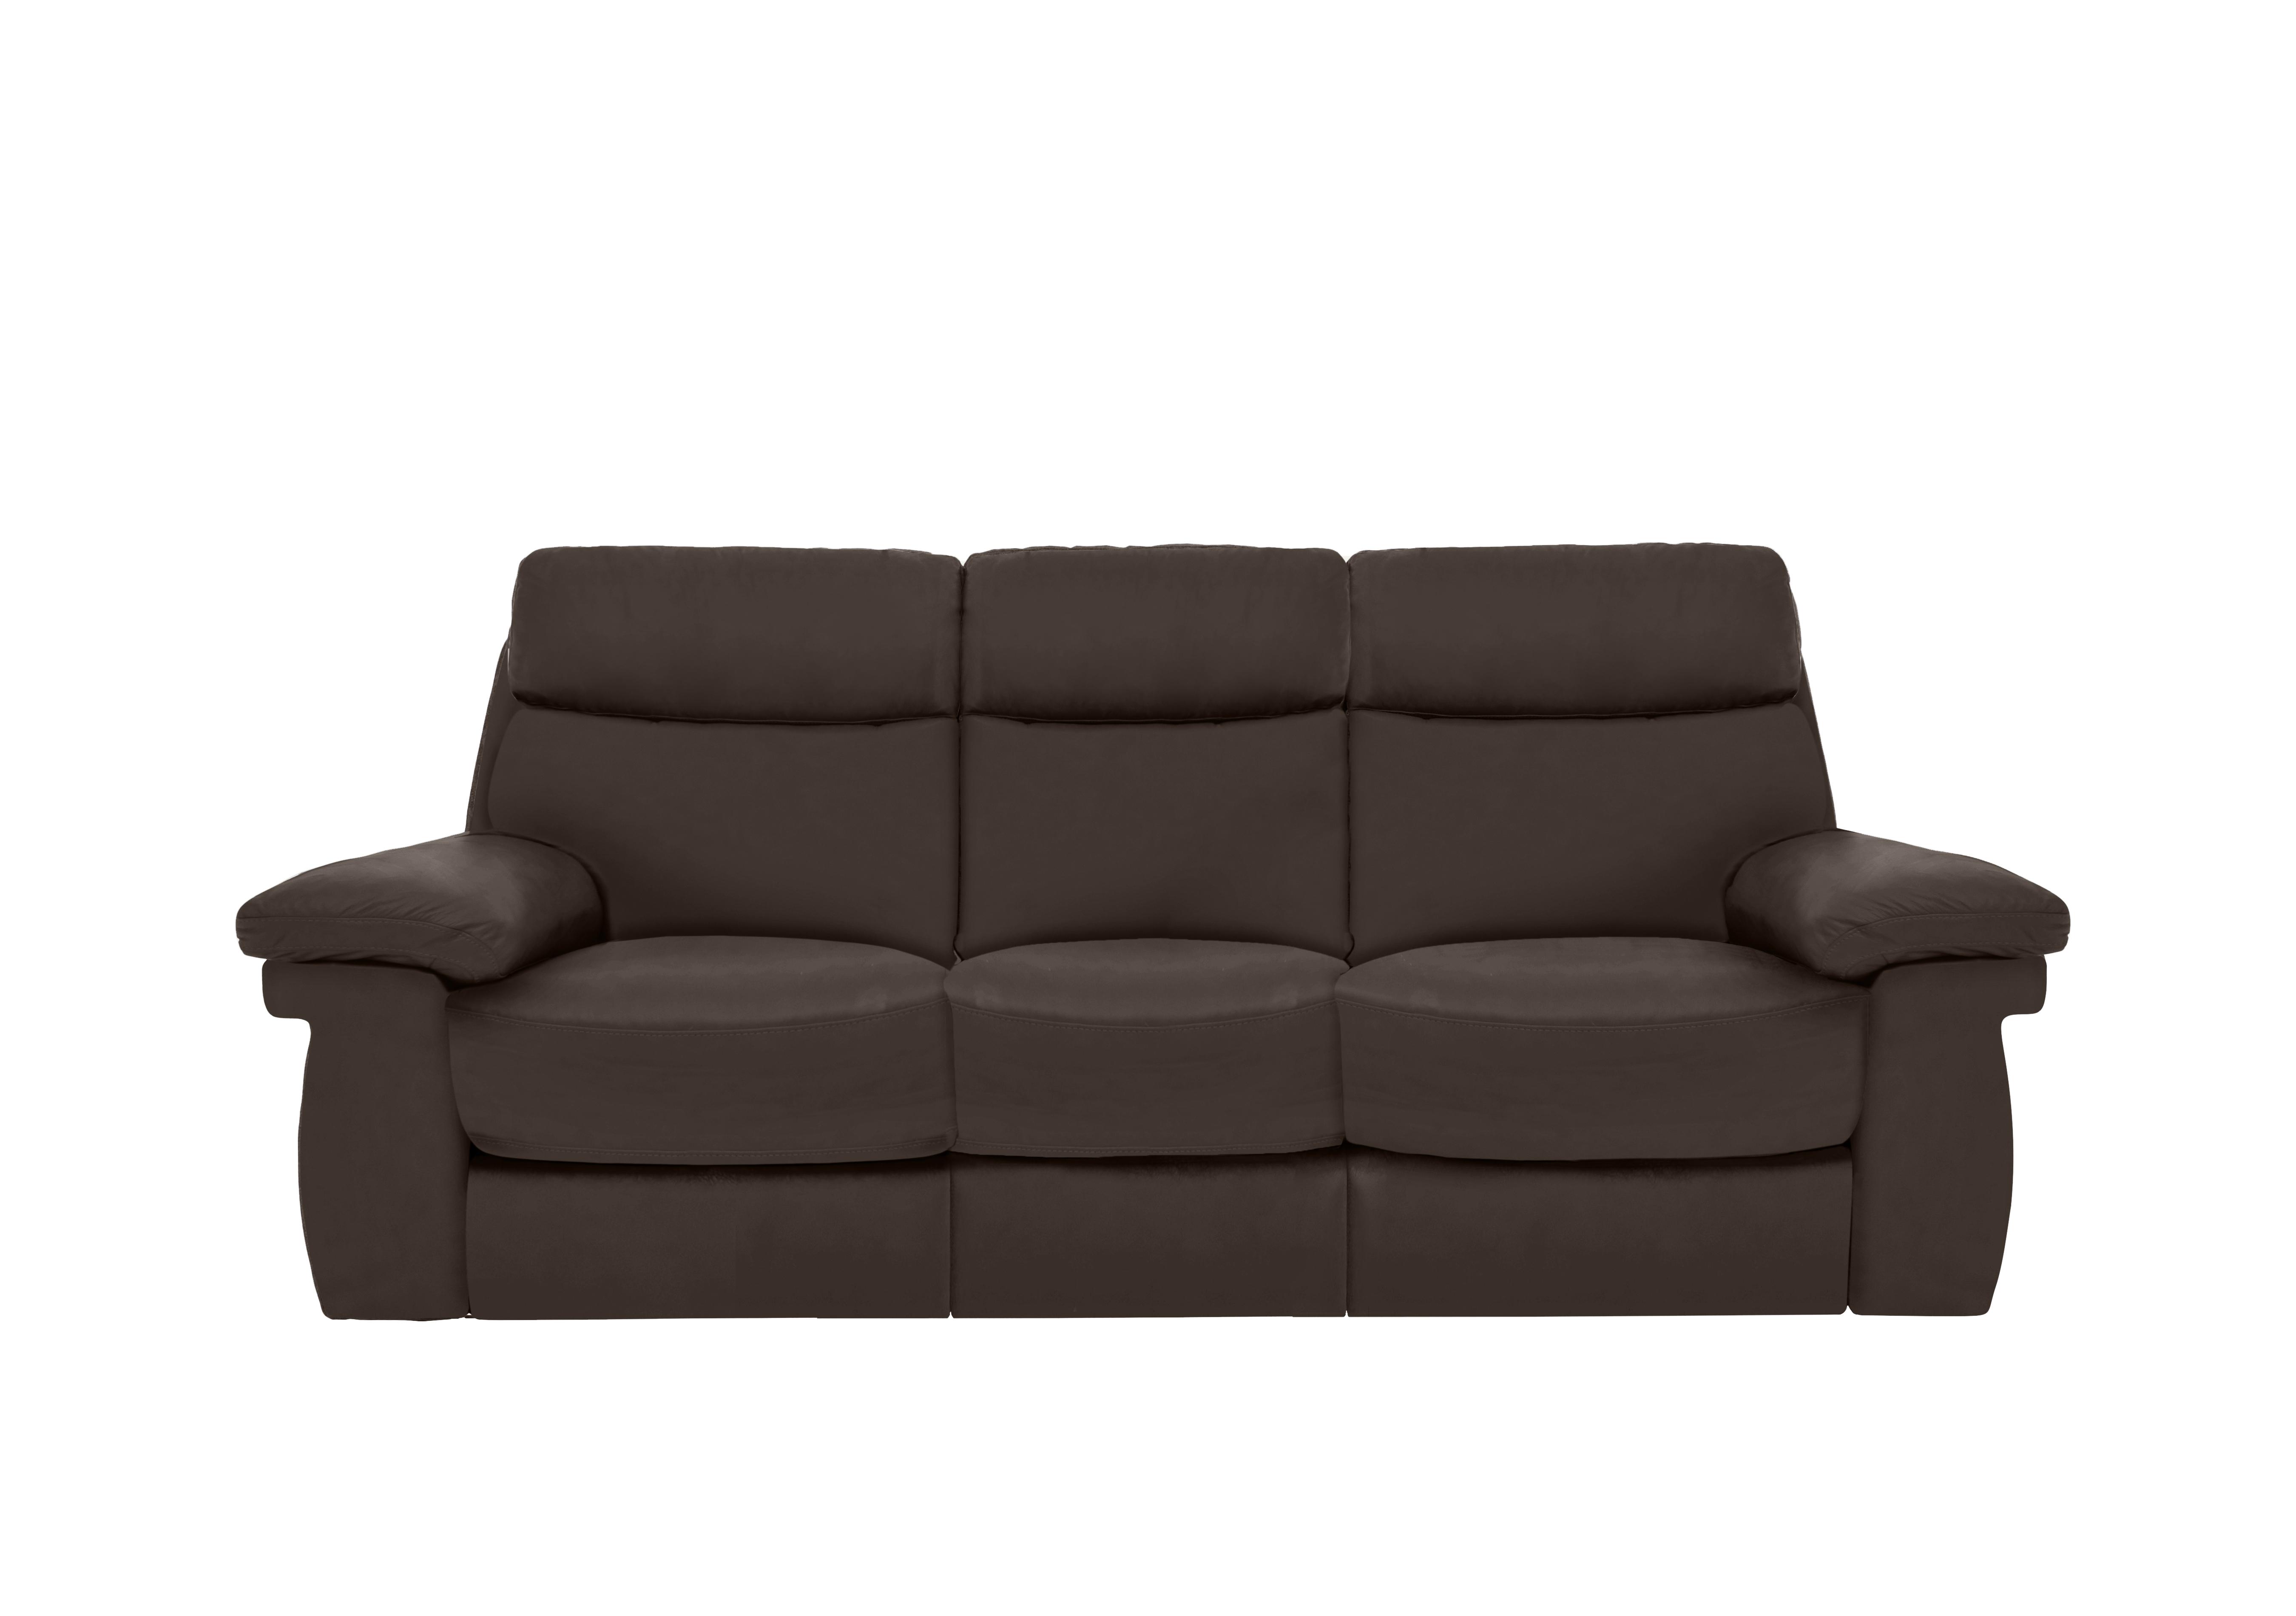 Serene 3 Seater Leather Power Recliner Sofa with Power Headrests and Power Lumbar in Bx-037c Walnut on Furniture Village